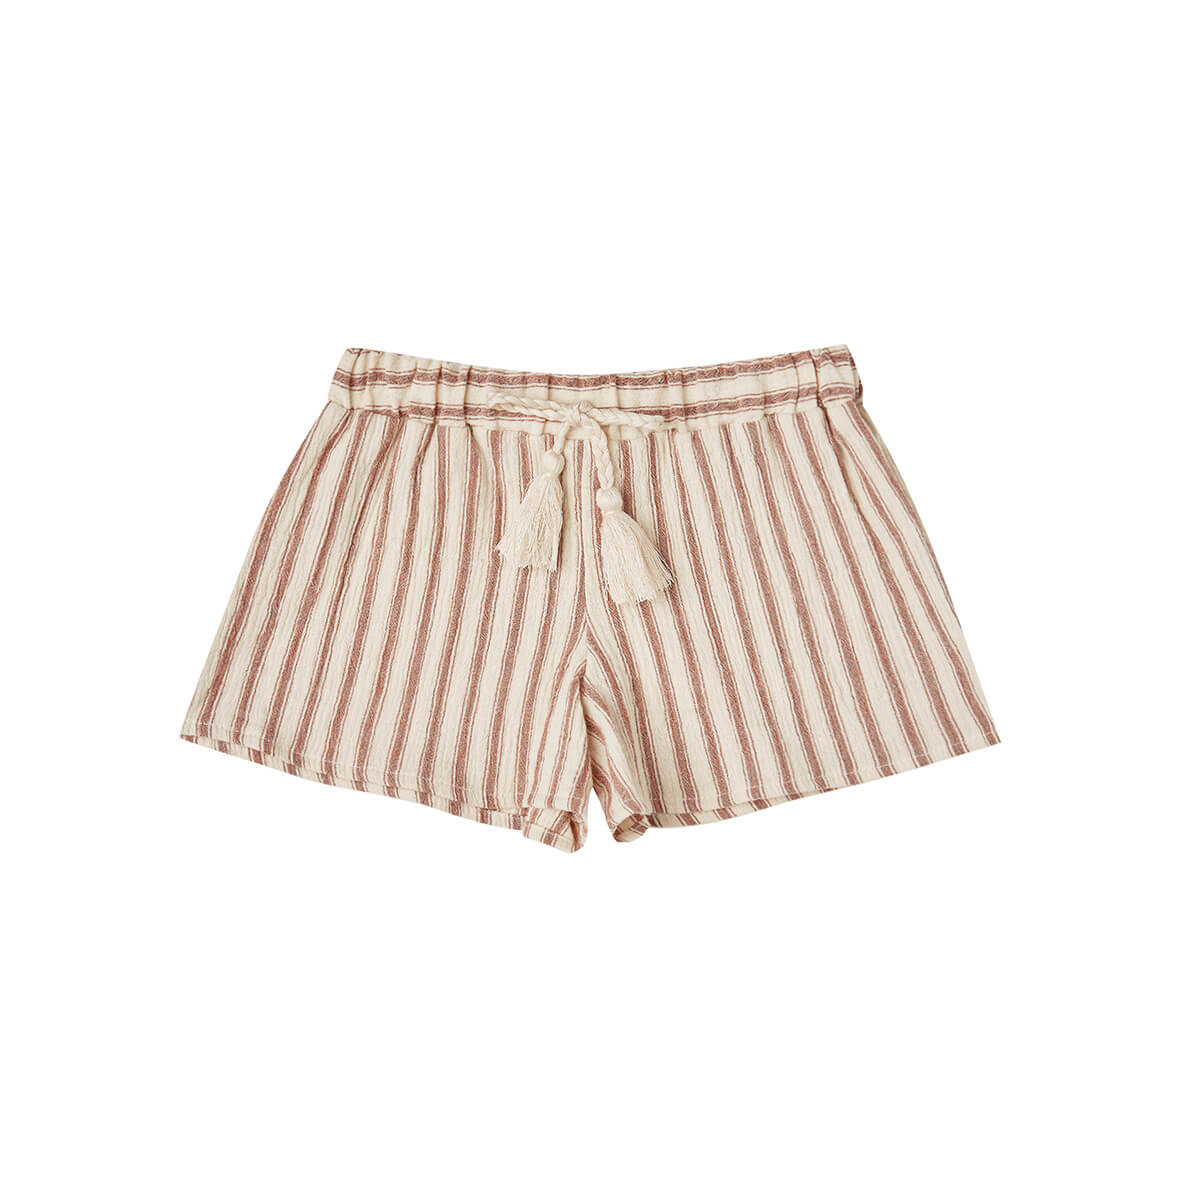 Striped Solana Shorts by Rylee + Cru - Last One In Stock - 8-9 Years ...